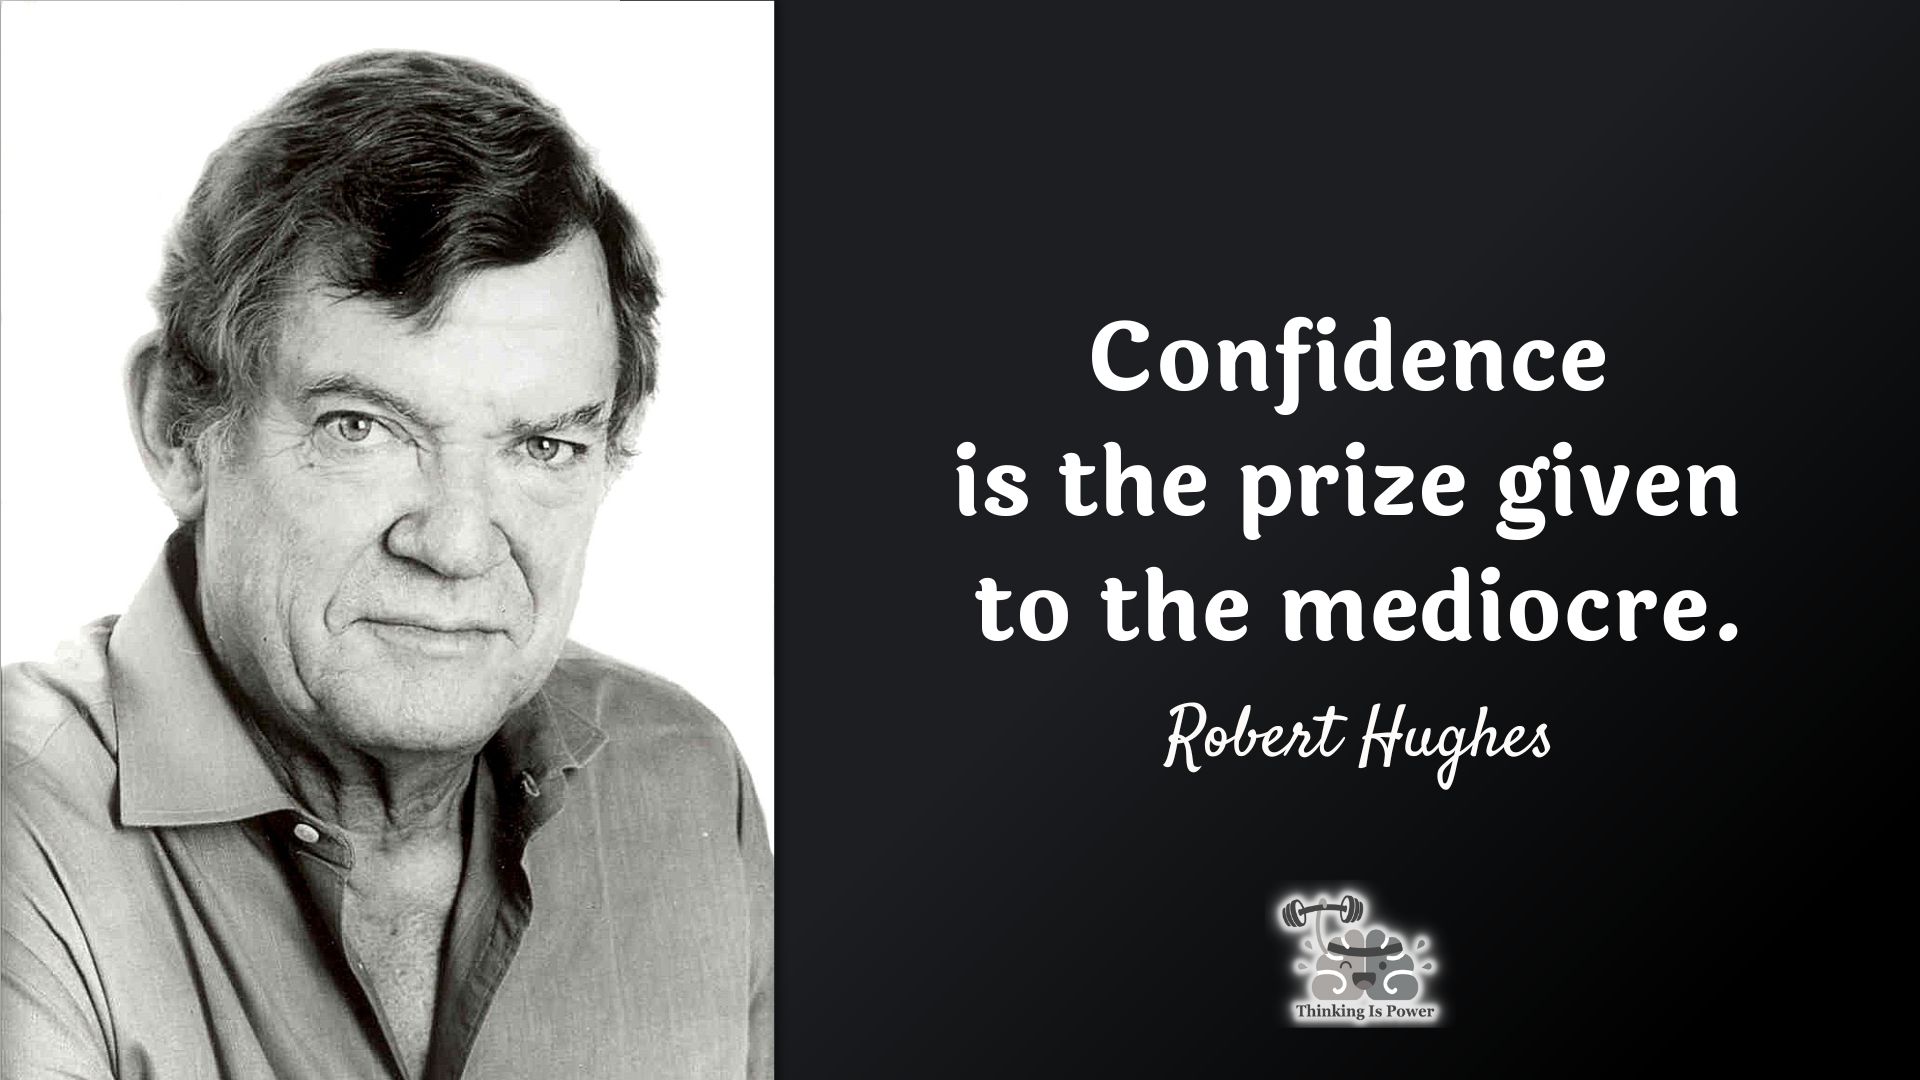 Robert Hughes quote Confidence is the prize given to the mediocre.